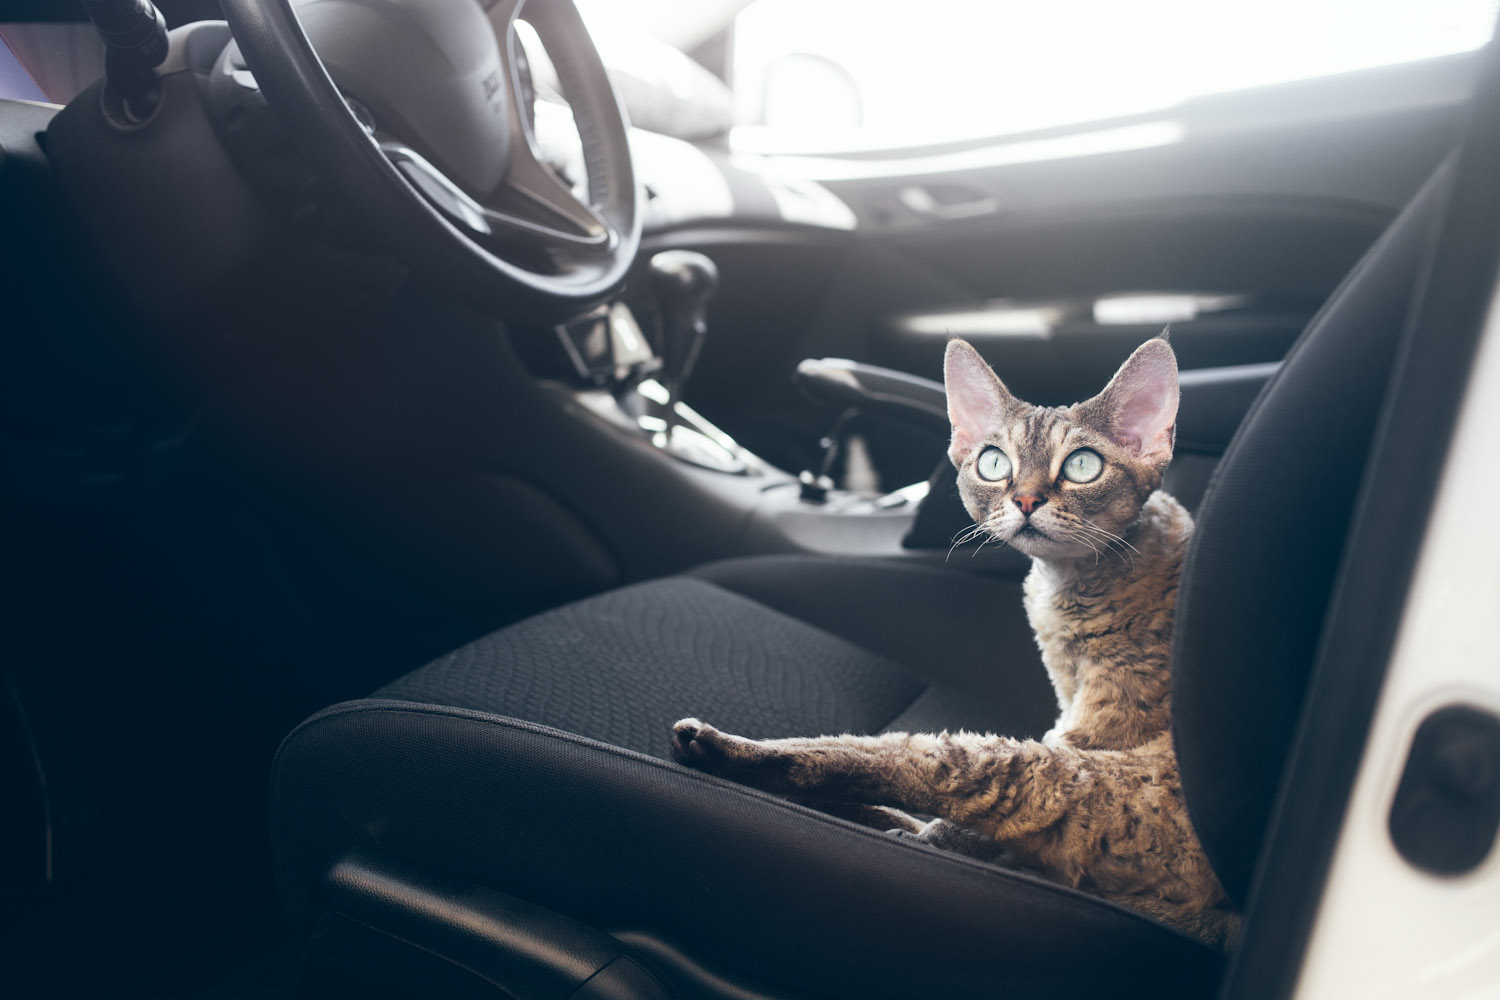 Never leave your cat alone in the car Adventure Cats